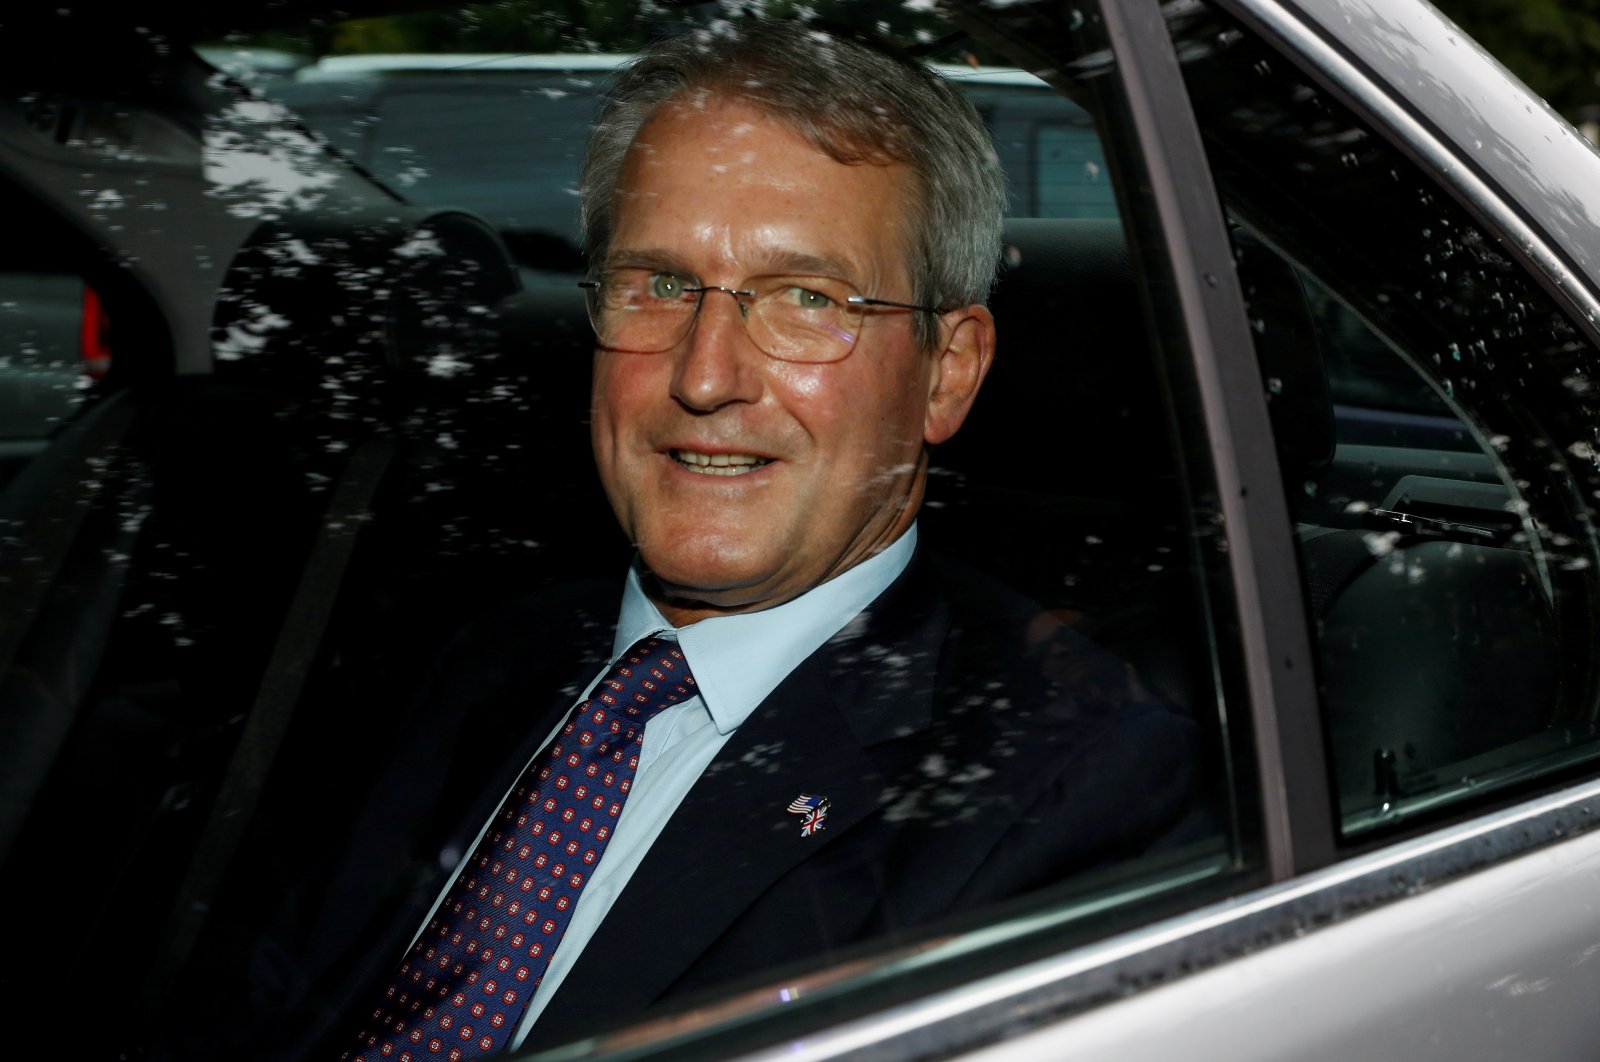 Owen Paterson leaves Winfield House during U.S. President Donald Trump's state visit in London, Britain, June 4, 2019. (Reuters Photo)